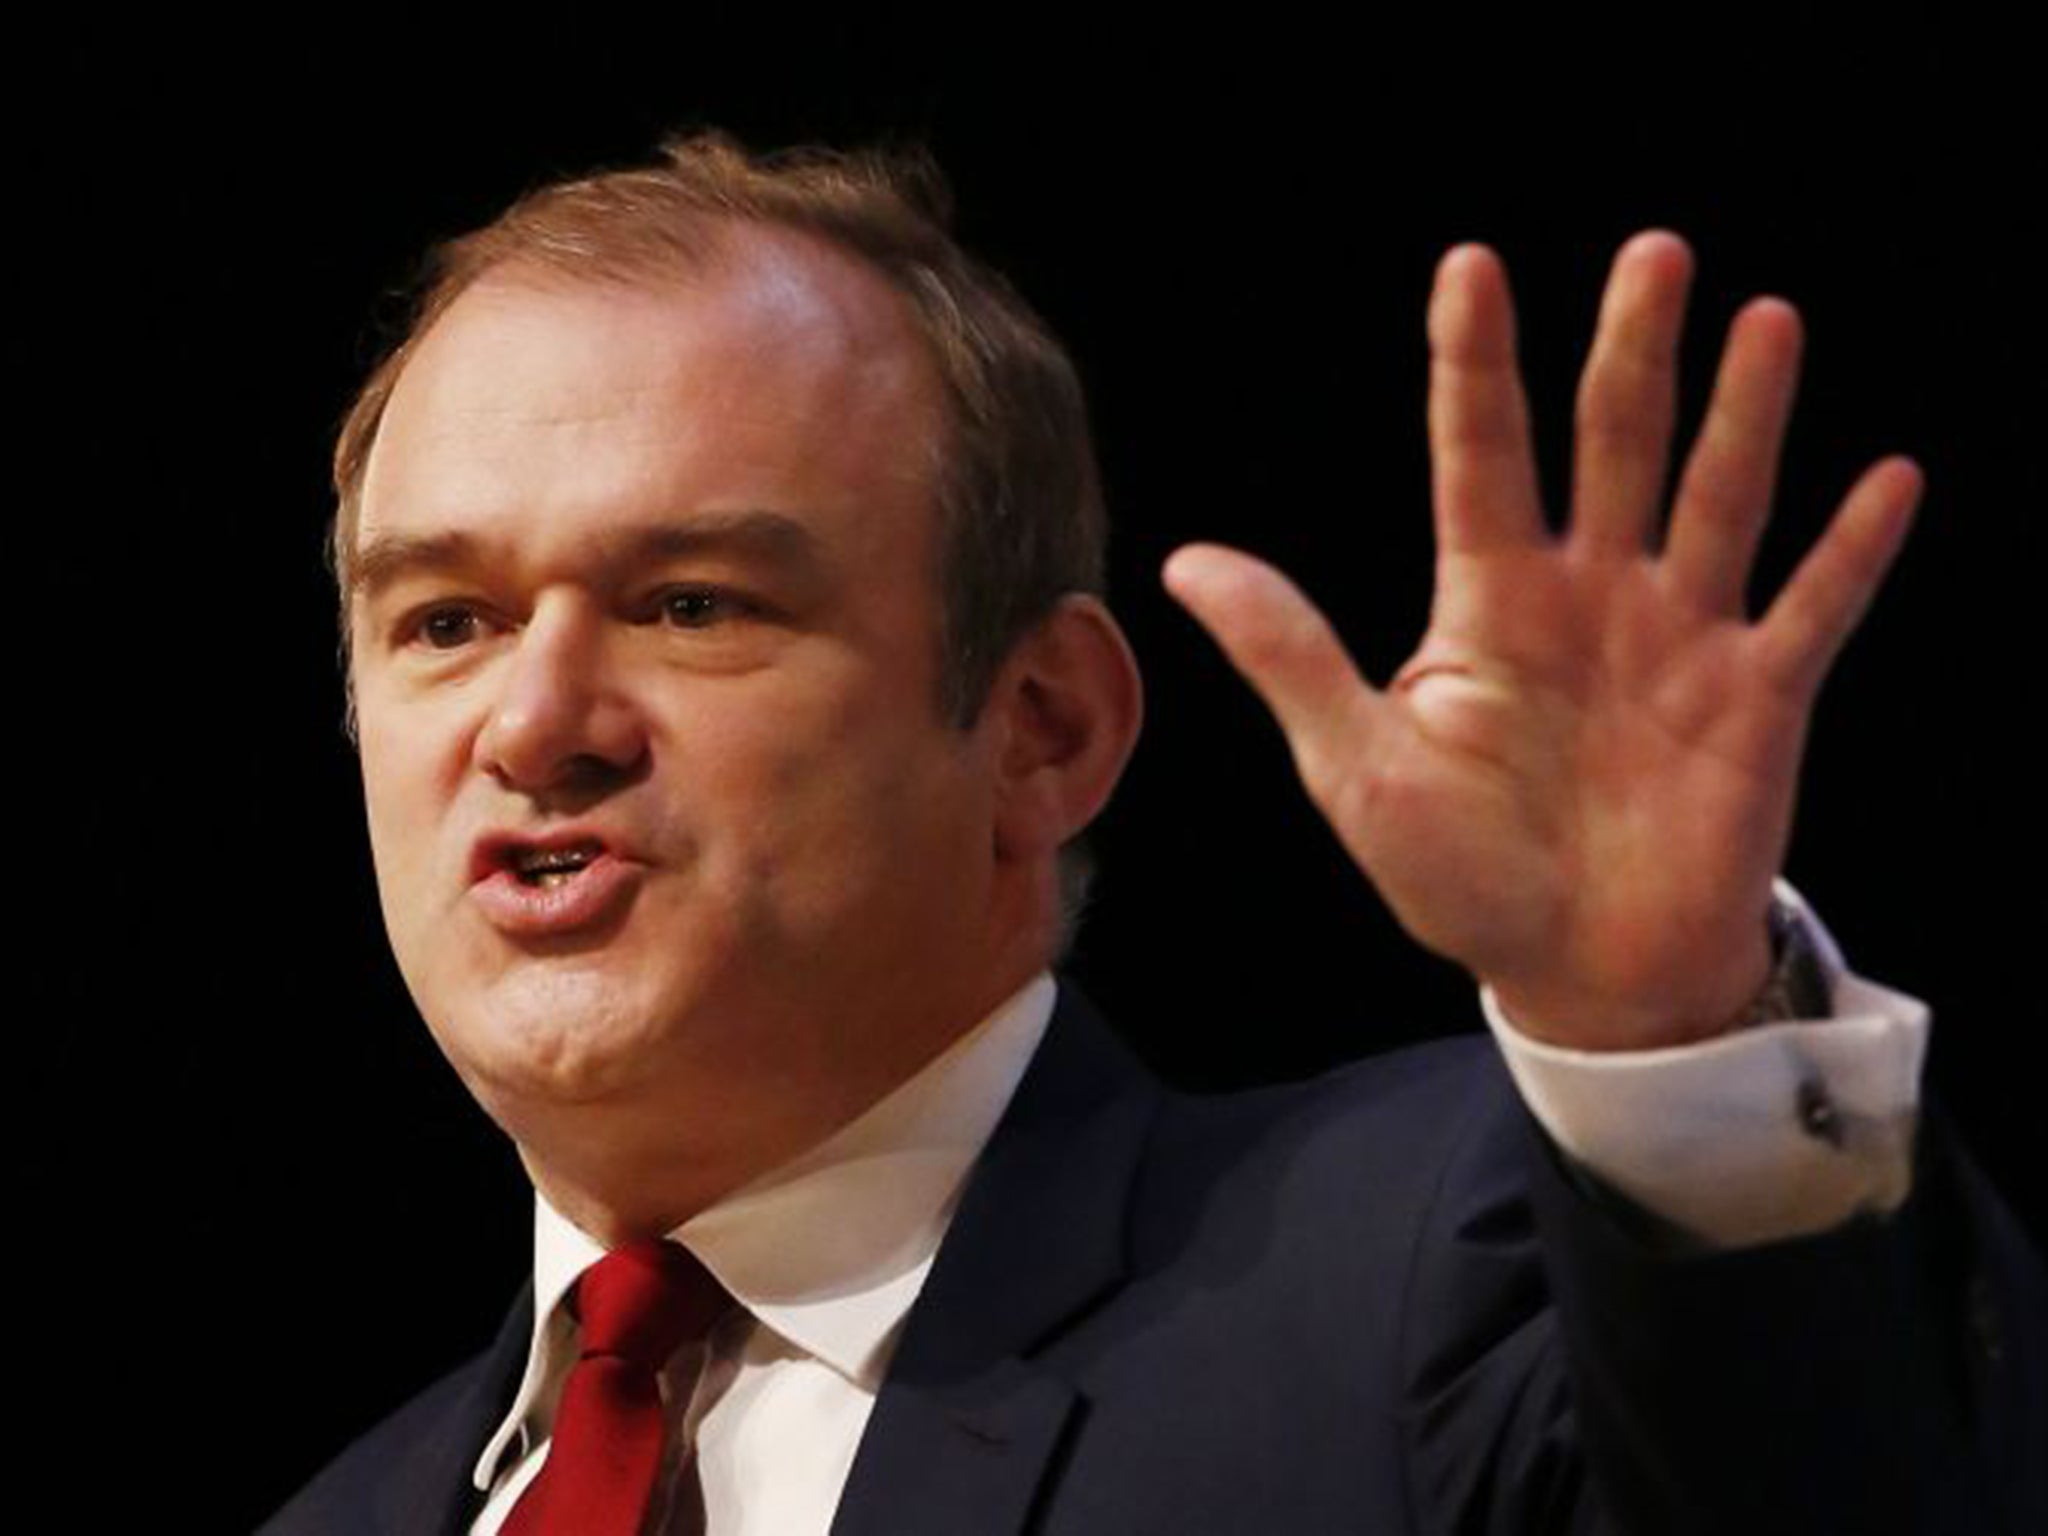 Ed Davey was energy secretary in the coalition